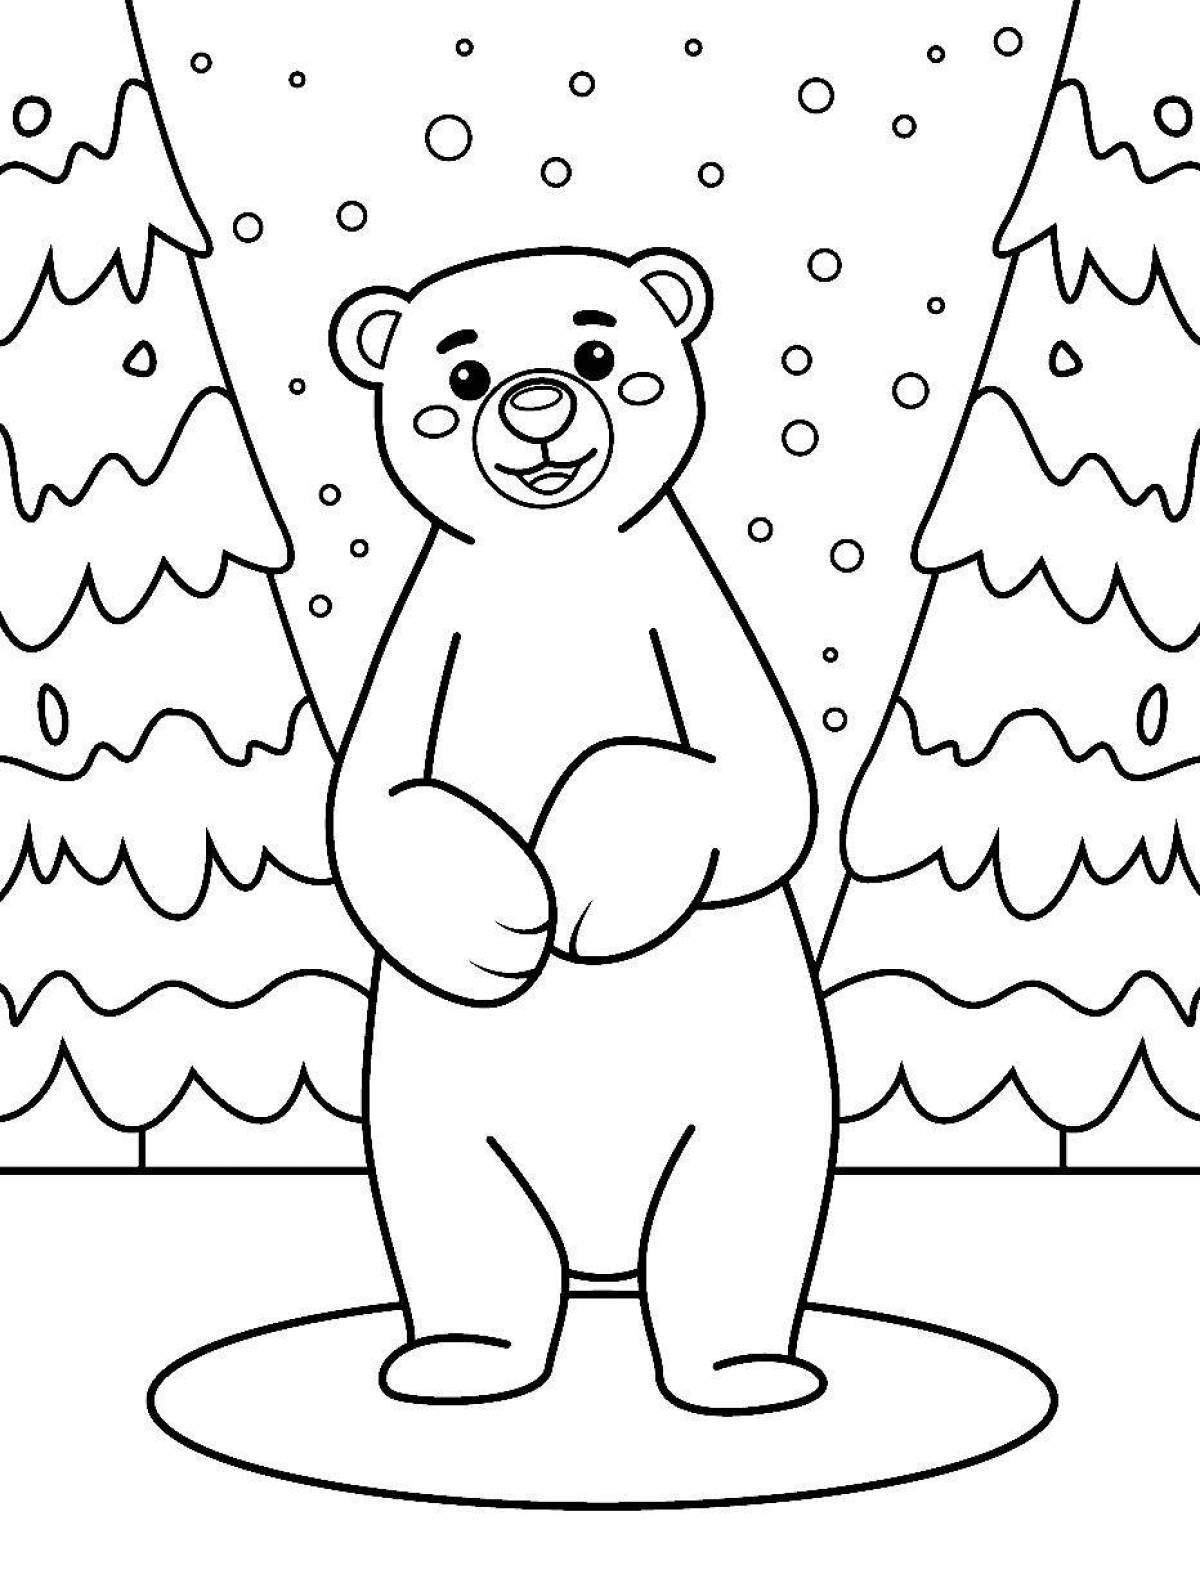 Cheerful polar bear coloring for children 6-7 years old